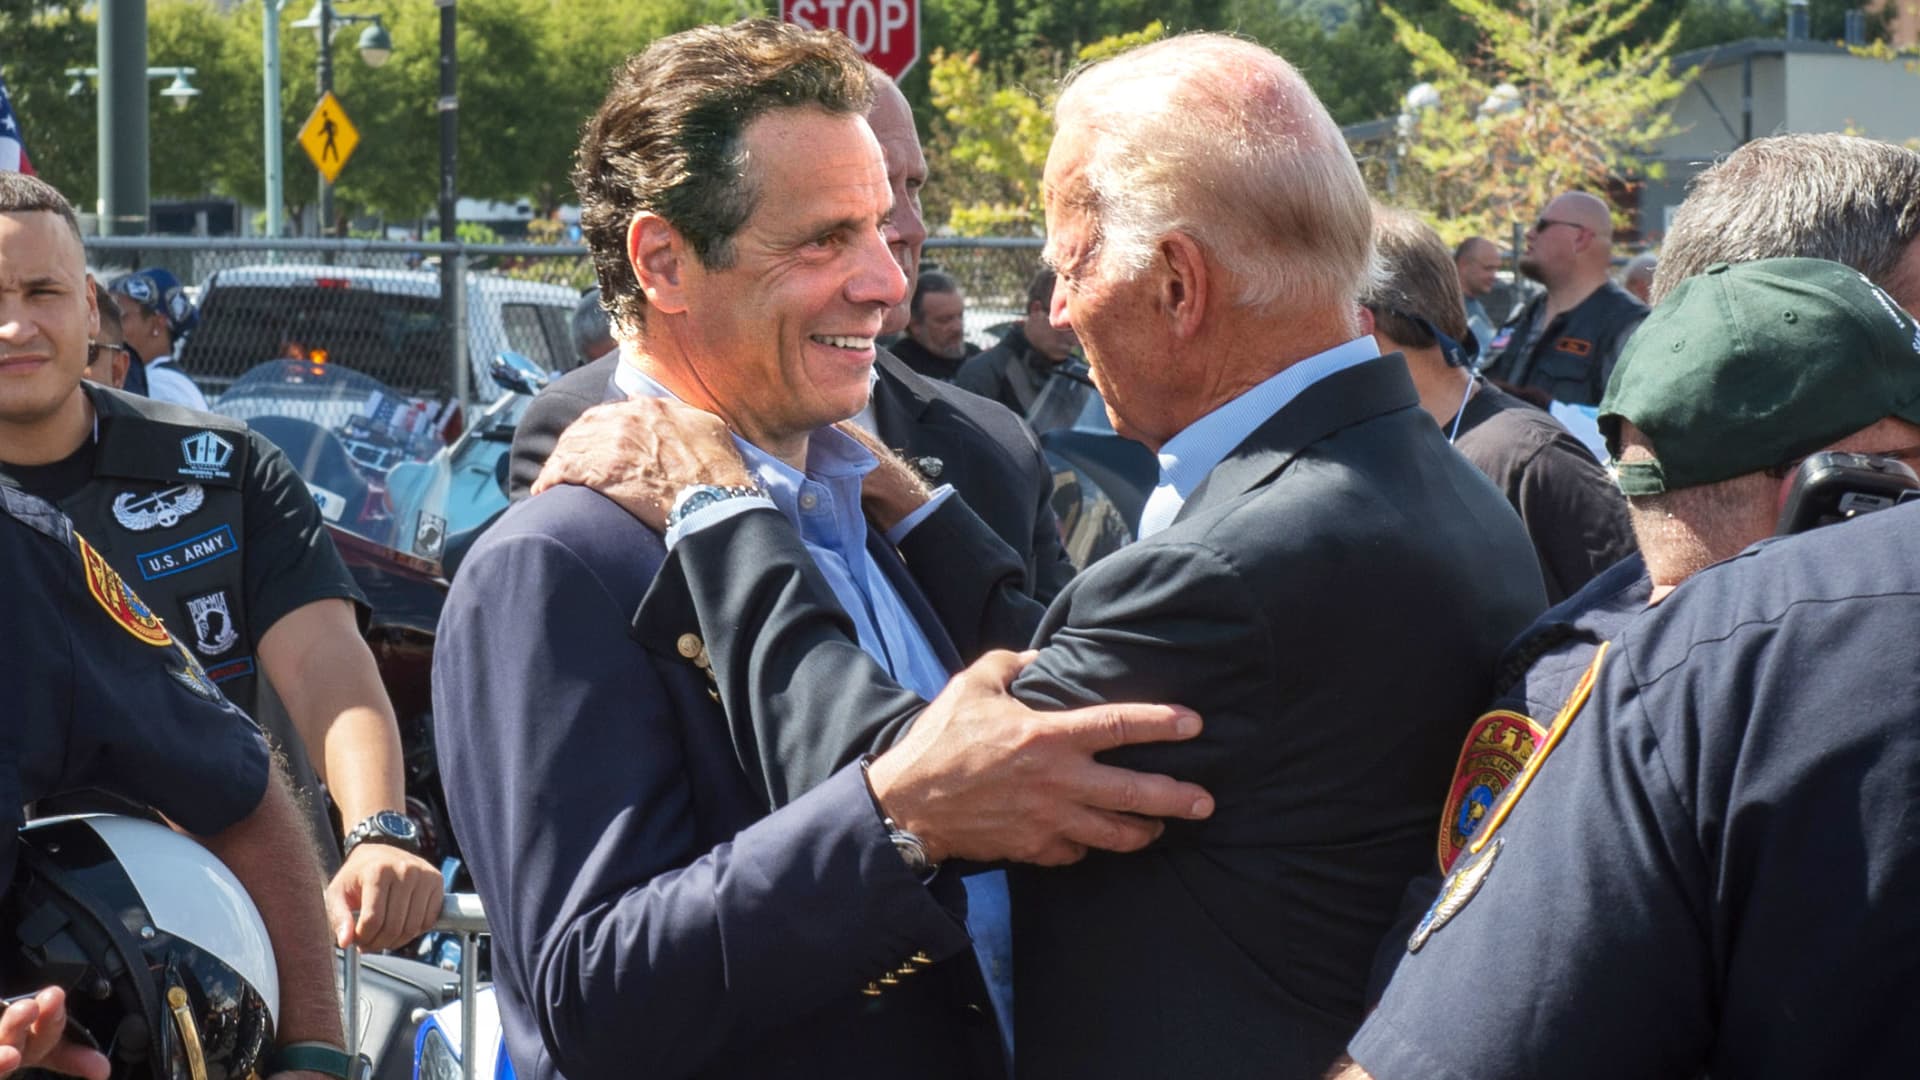 New York Gov. Andrew Cuomo and Vice President Joseph Biden embrace following a luncheon honoring motorcycle riders participating in the 9/11 Memorial Motorcycle Ride, Friday, Sept. 11, 2015, in New York.